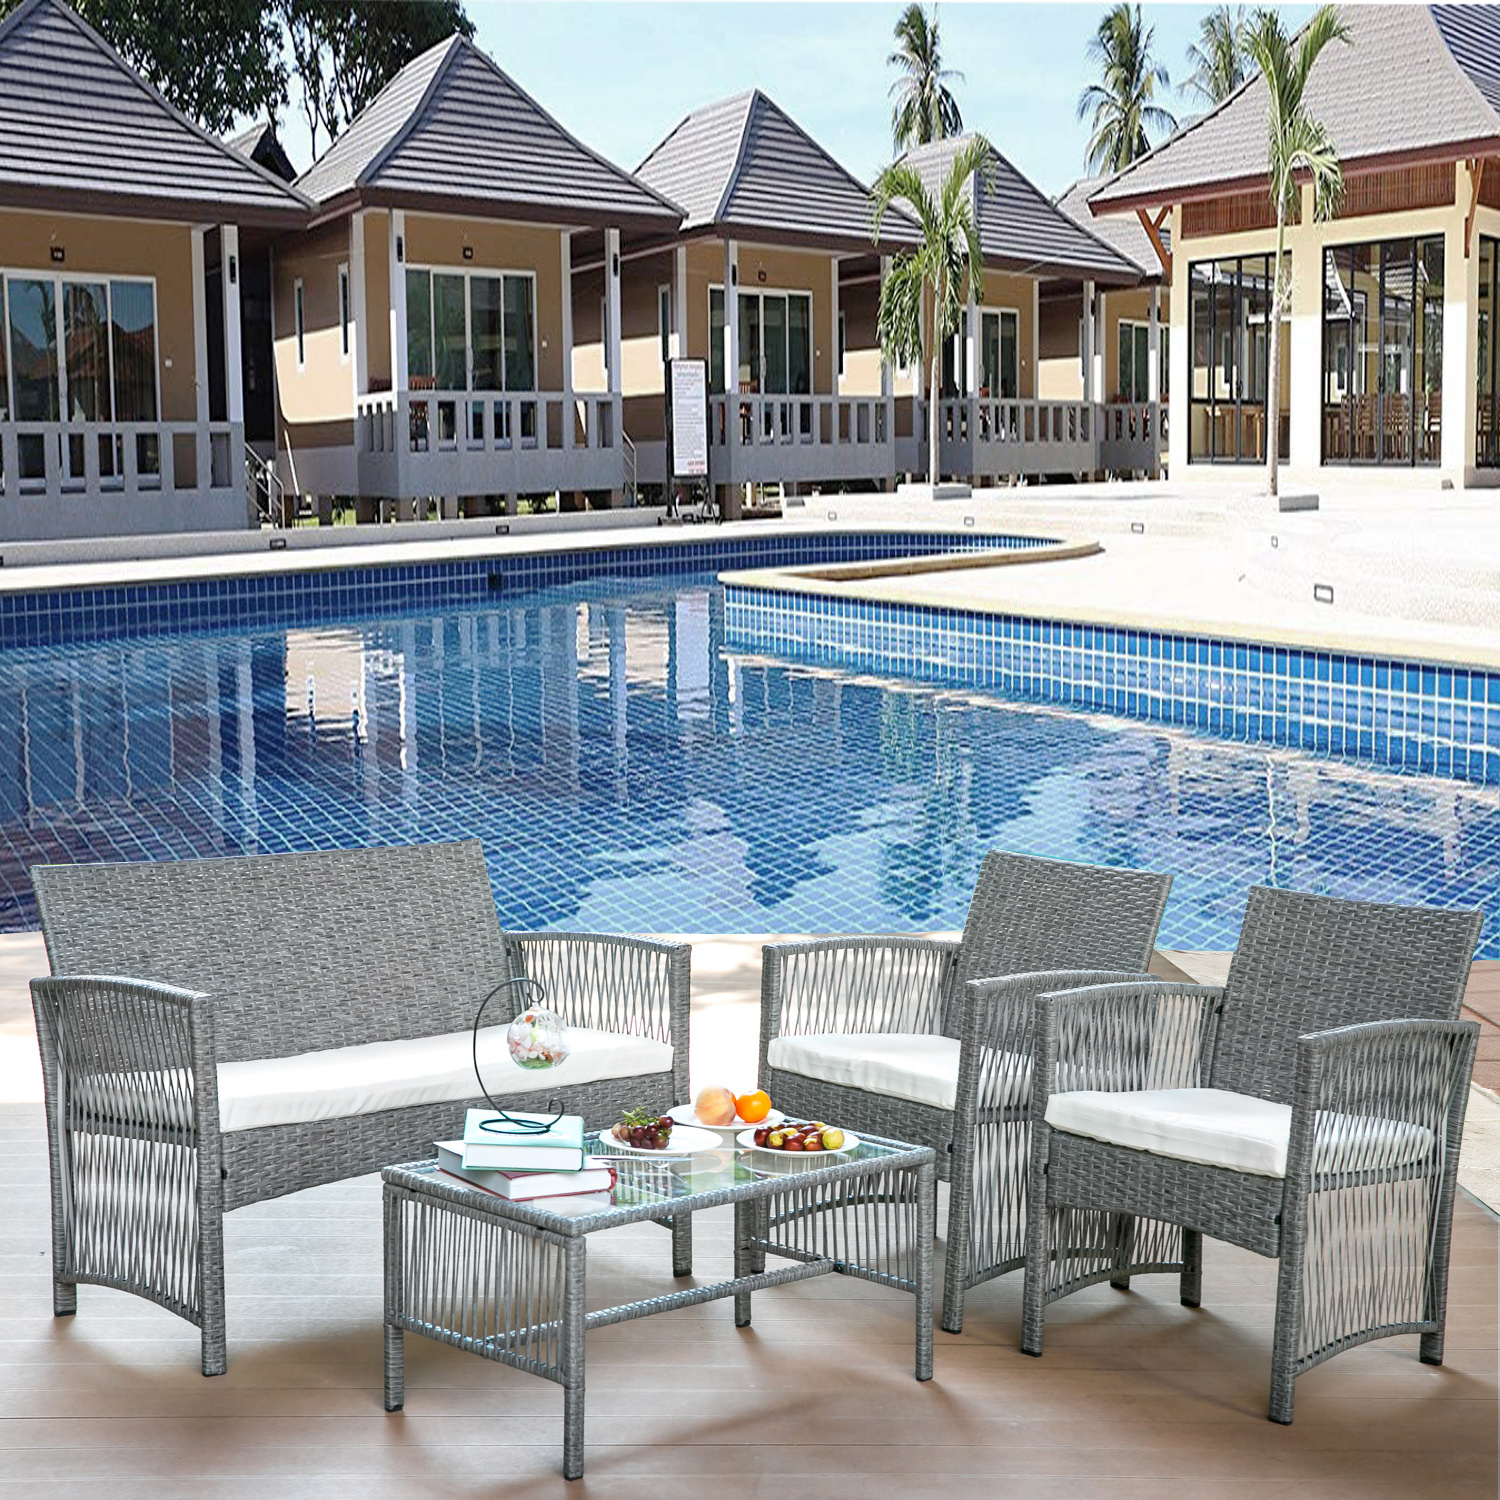 Patio Outdoor Furniture Sets, UHOMEPRO 4 Pieces PE Rattan Garden Furniture Wicker Chairs Set with Coffee Table, Outdoor Conversation Sets, Patio Dining Set for Backyard Poolside Porch, Gray, W7764 - image 3 of 11